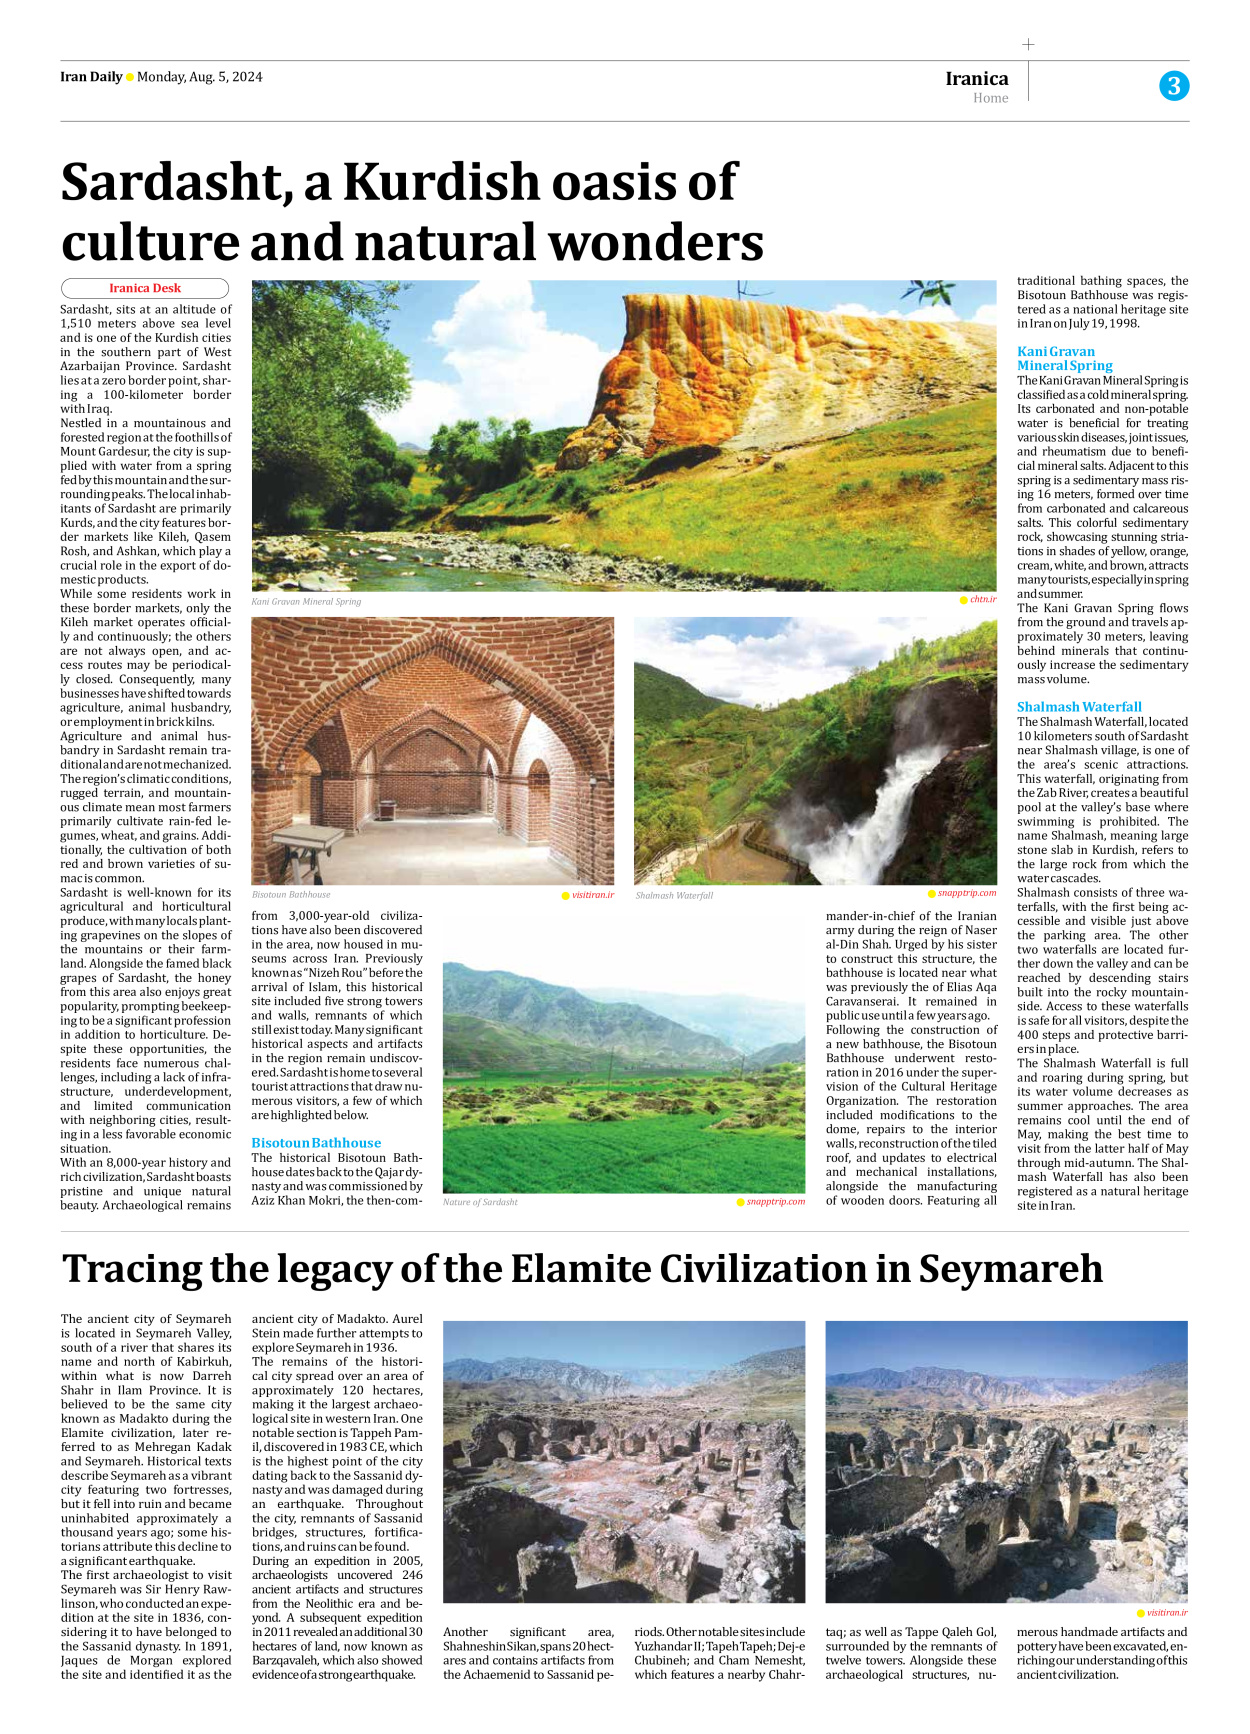 Iran Daily - Number Seven Thousand Six Hundred and Twenty - 05 August 2024 - Page 3